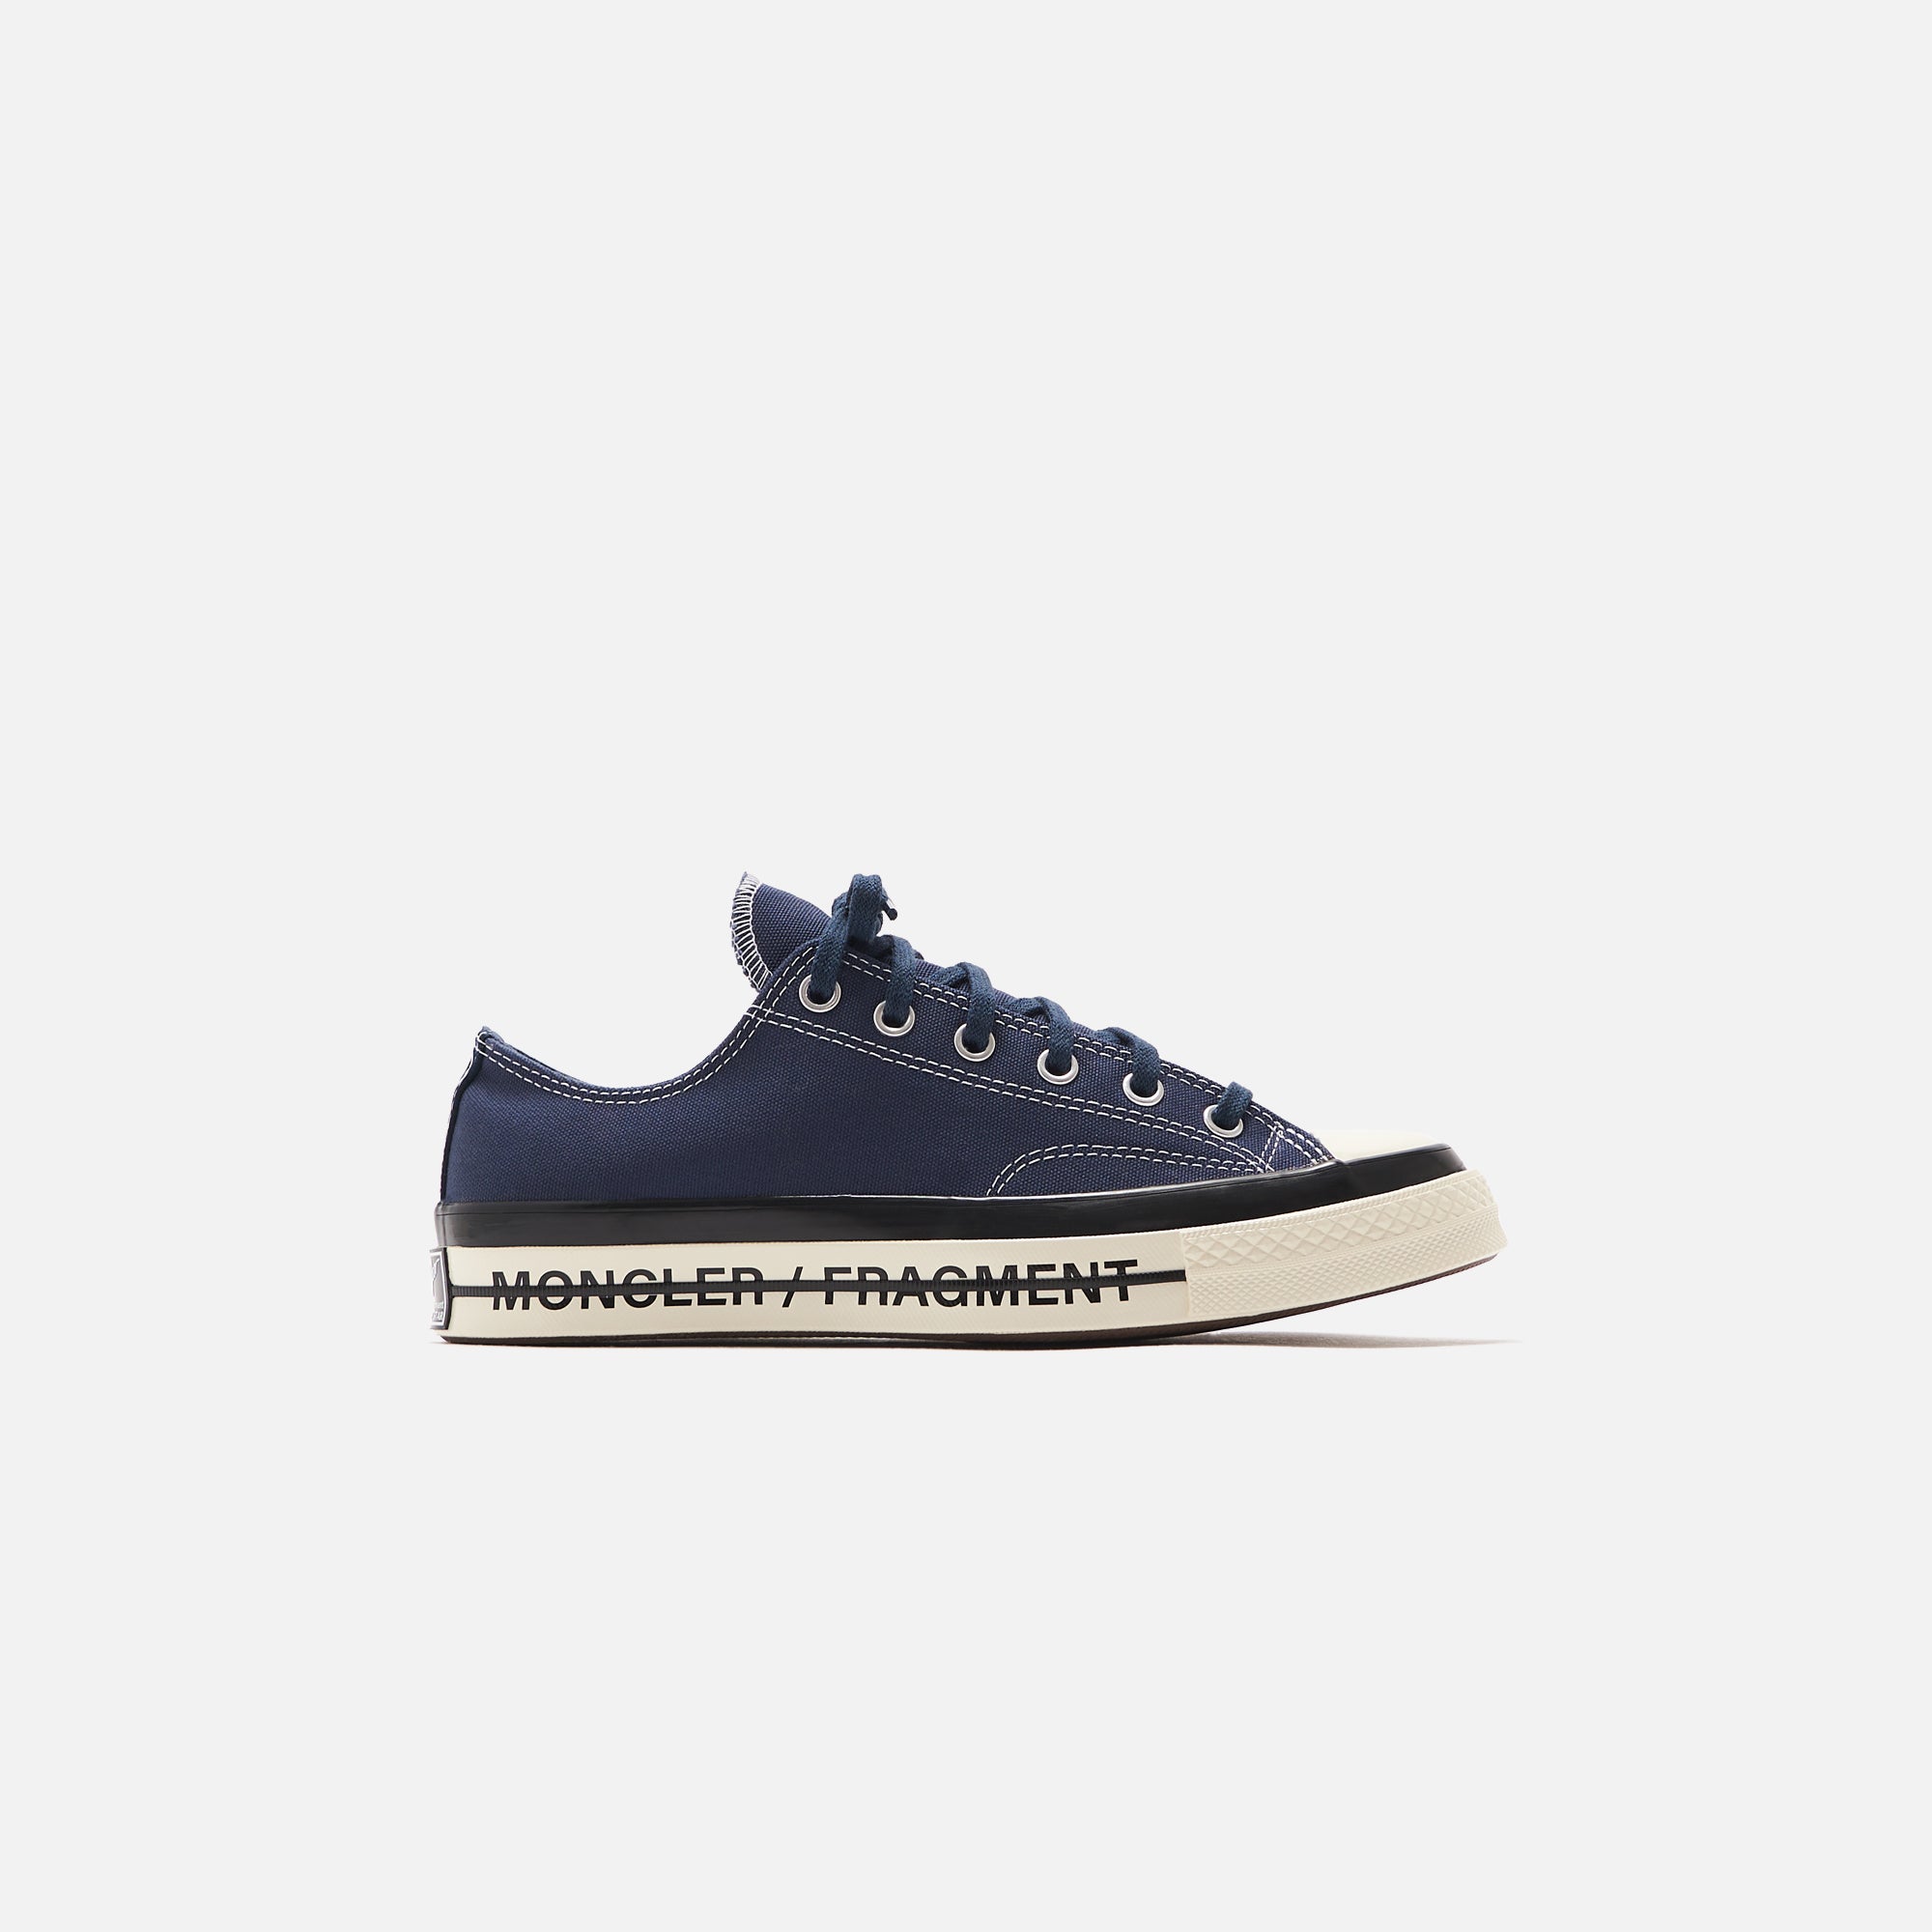 Moncler x Fragment x Converse Fraylor III Low Top - Navy – Kith